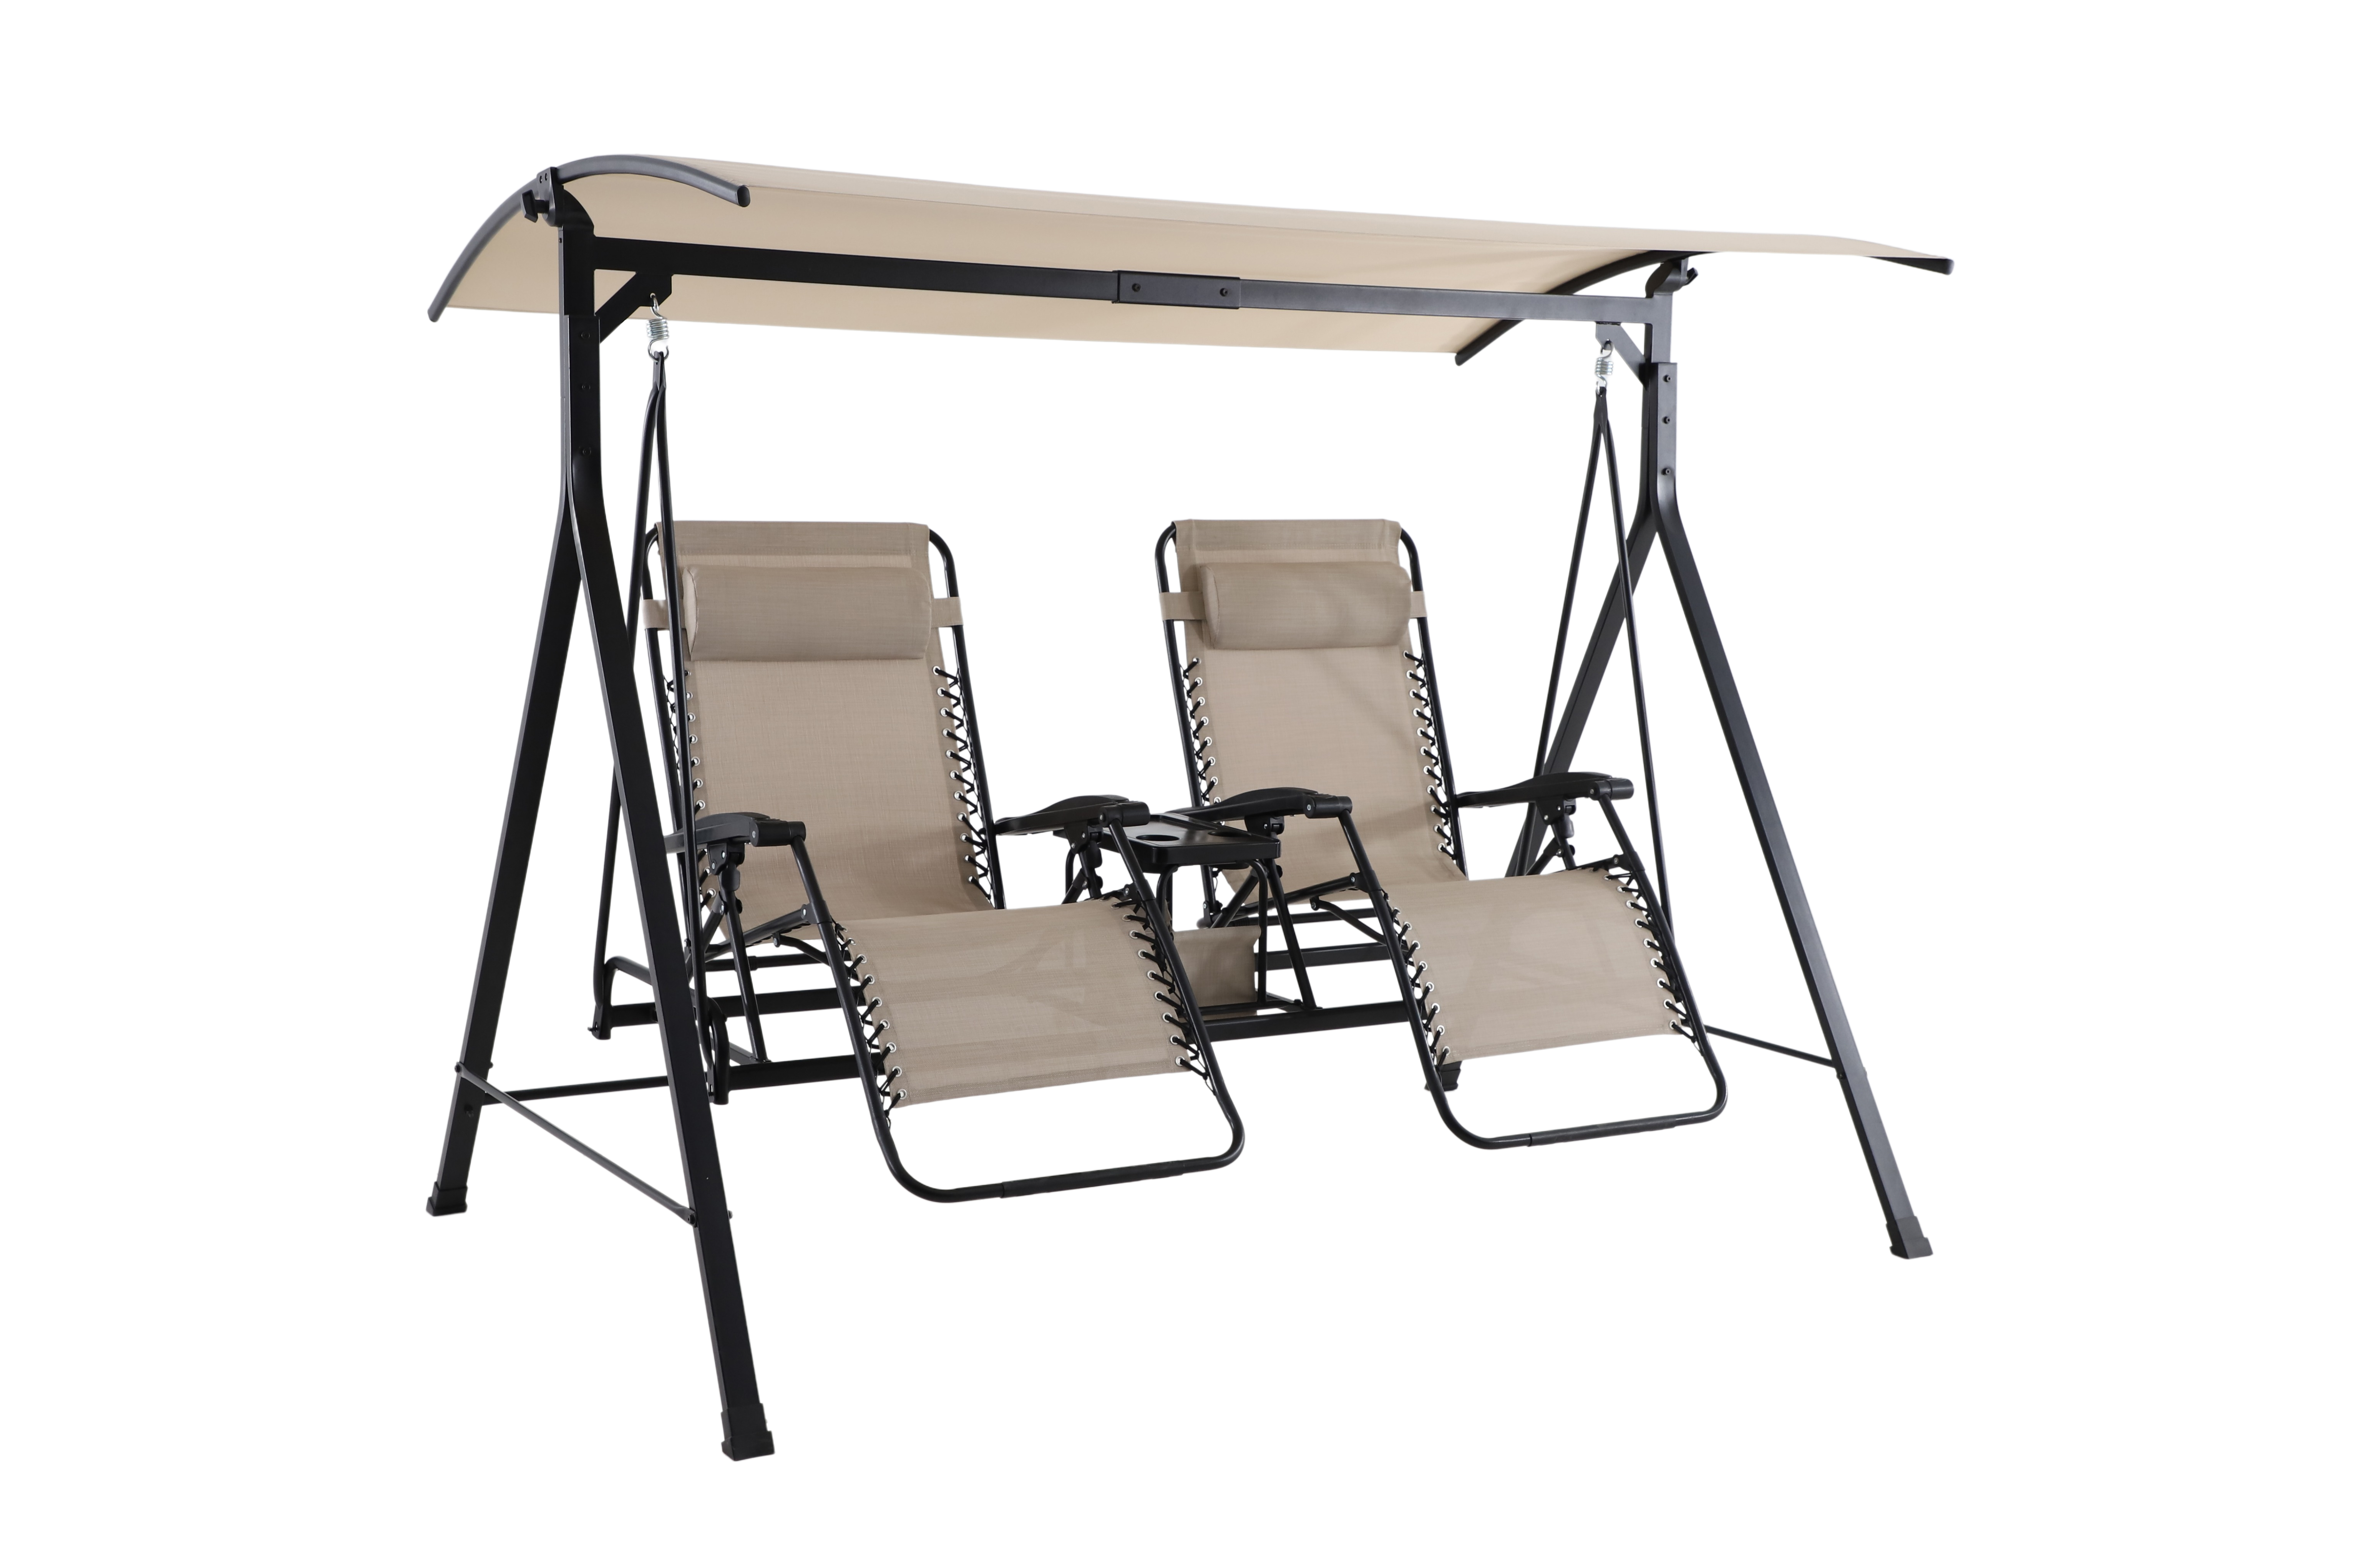 Mainstays 2-Seat Reclining Oversized Zero-Gravity Swing with Canopy and Center Storage Console, Beige/Black - image 5 of 9